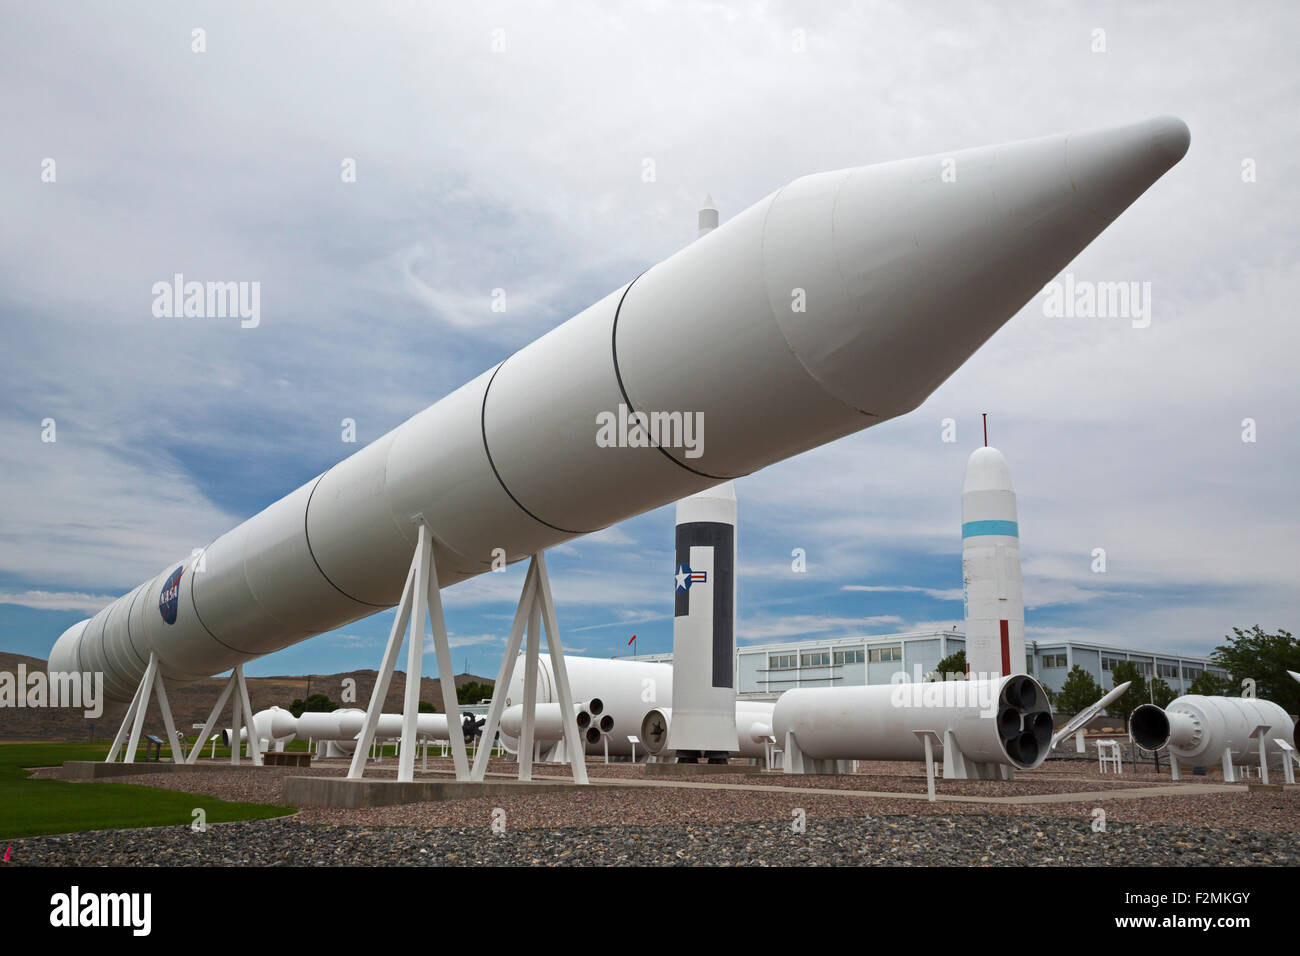 Promontory, Utah - The space shuttle reusable solid rocket motor displayed at Orbital ATK's test facility. Stock Photo